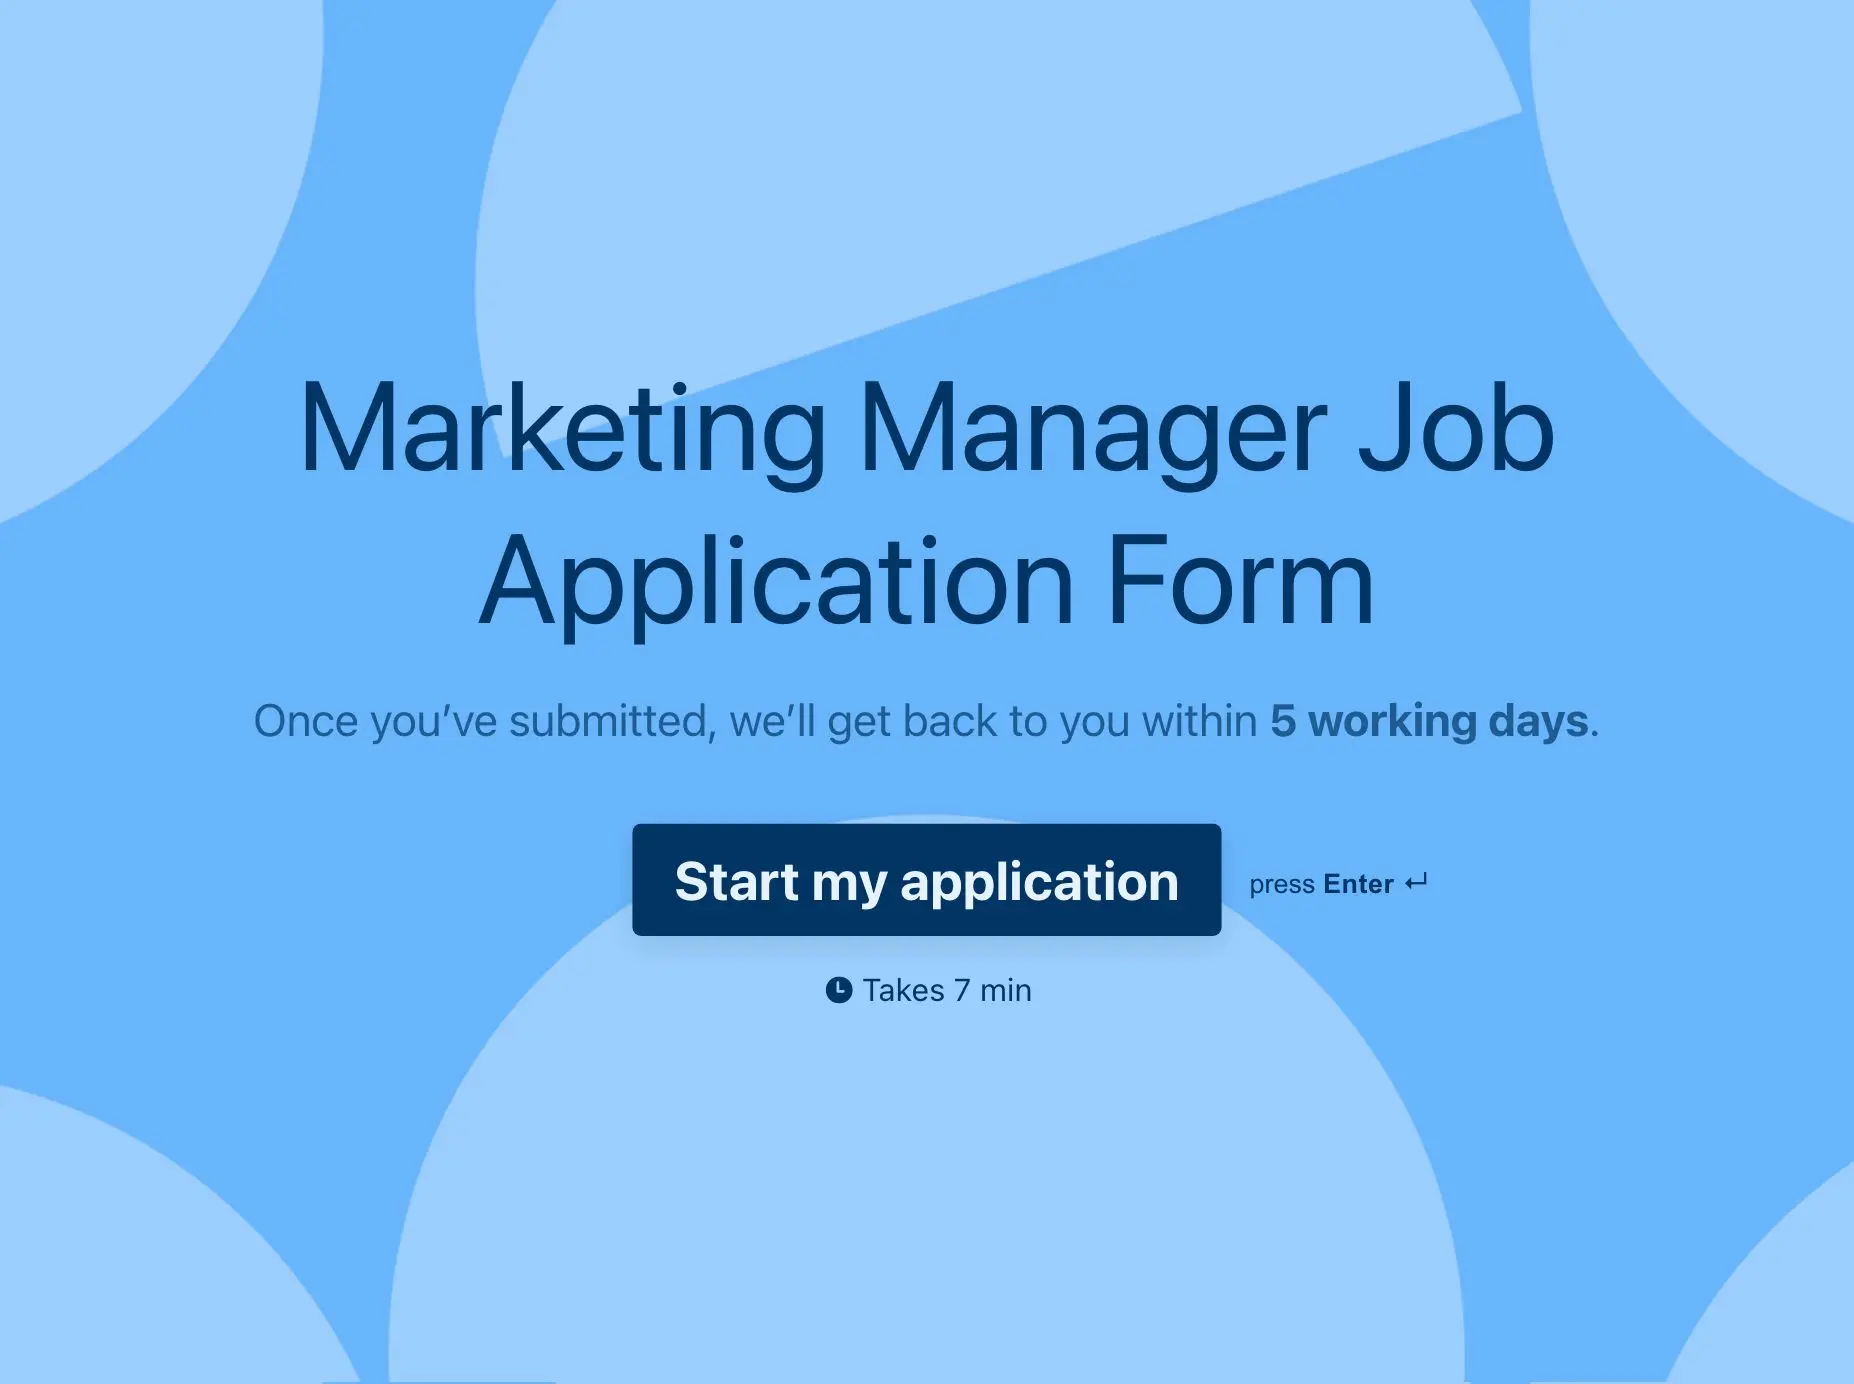 Marketing Manager Job Application Form Template Hero